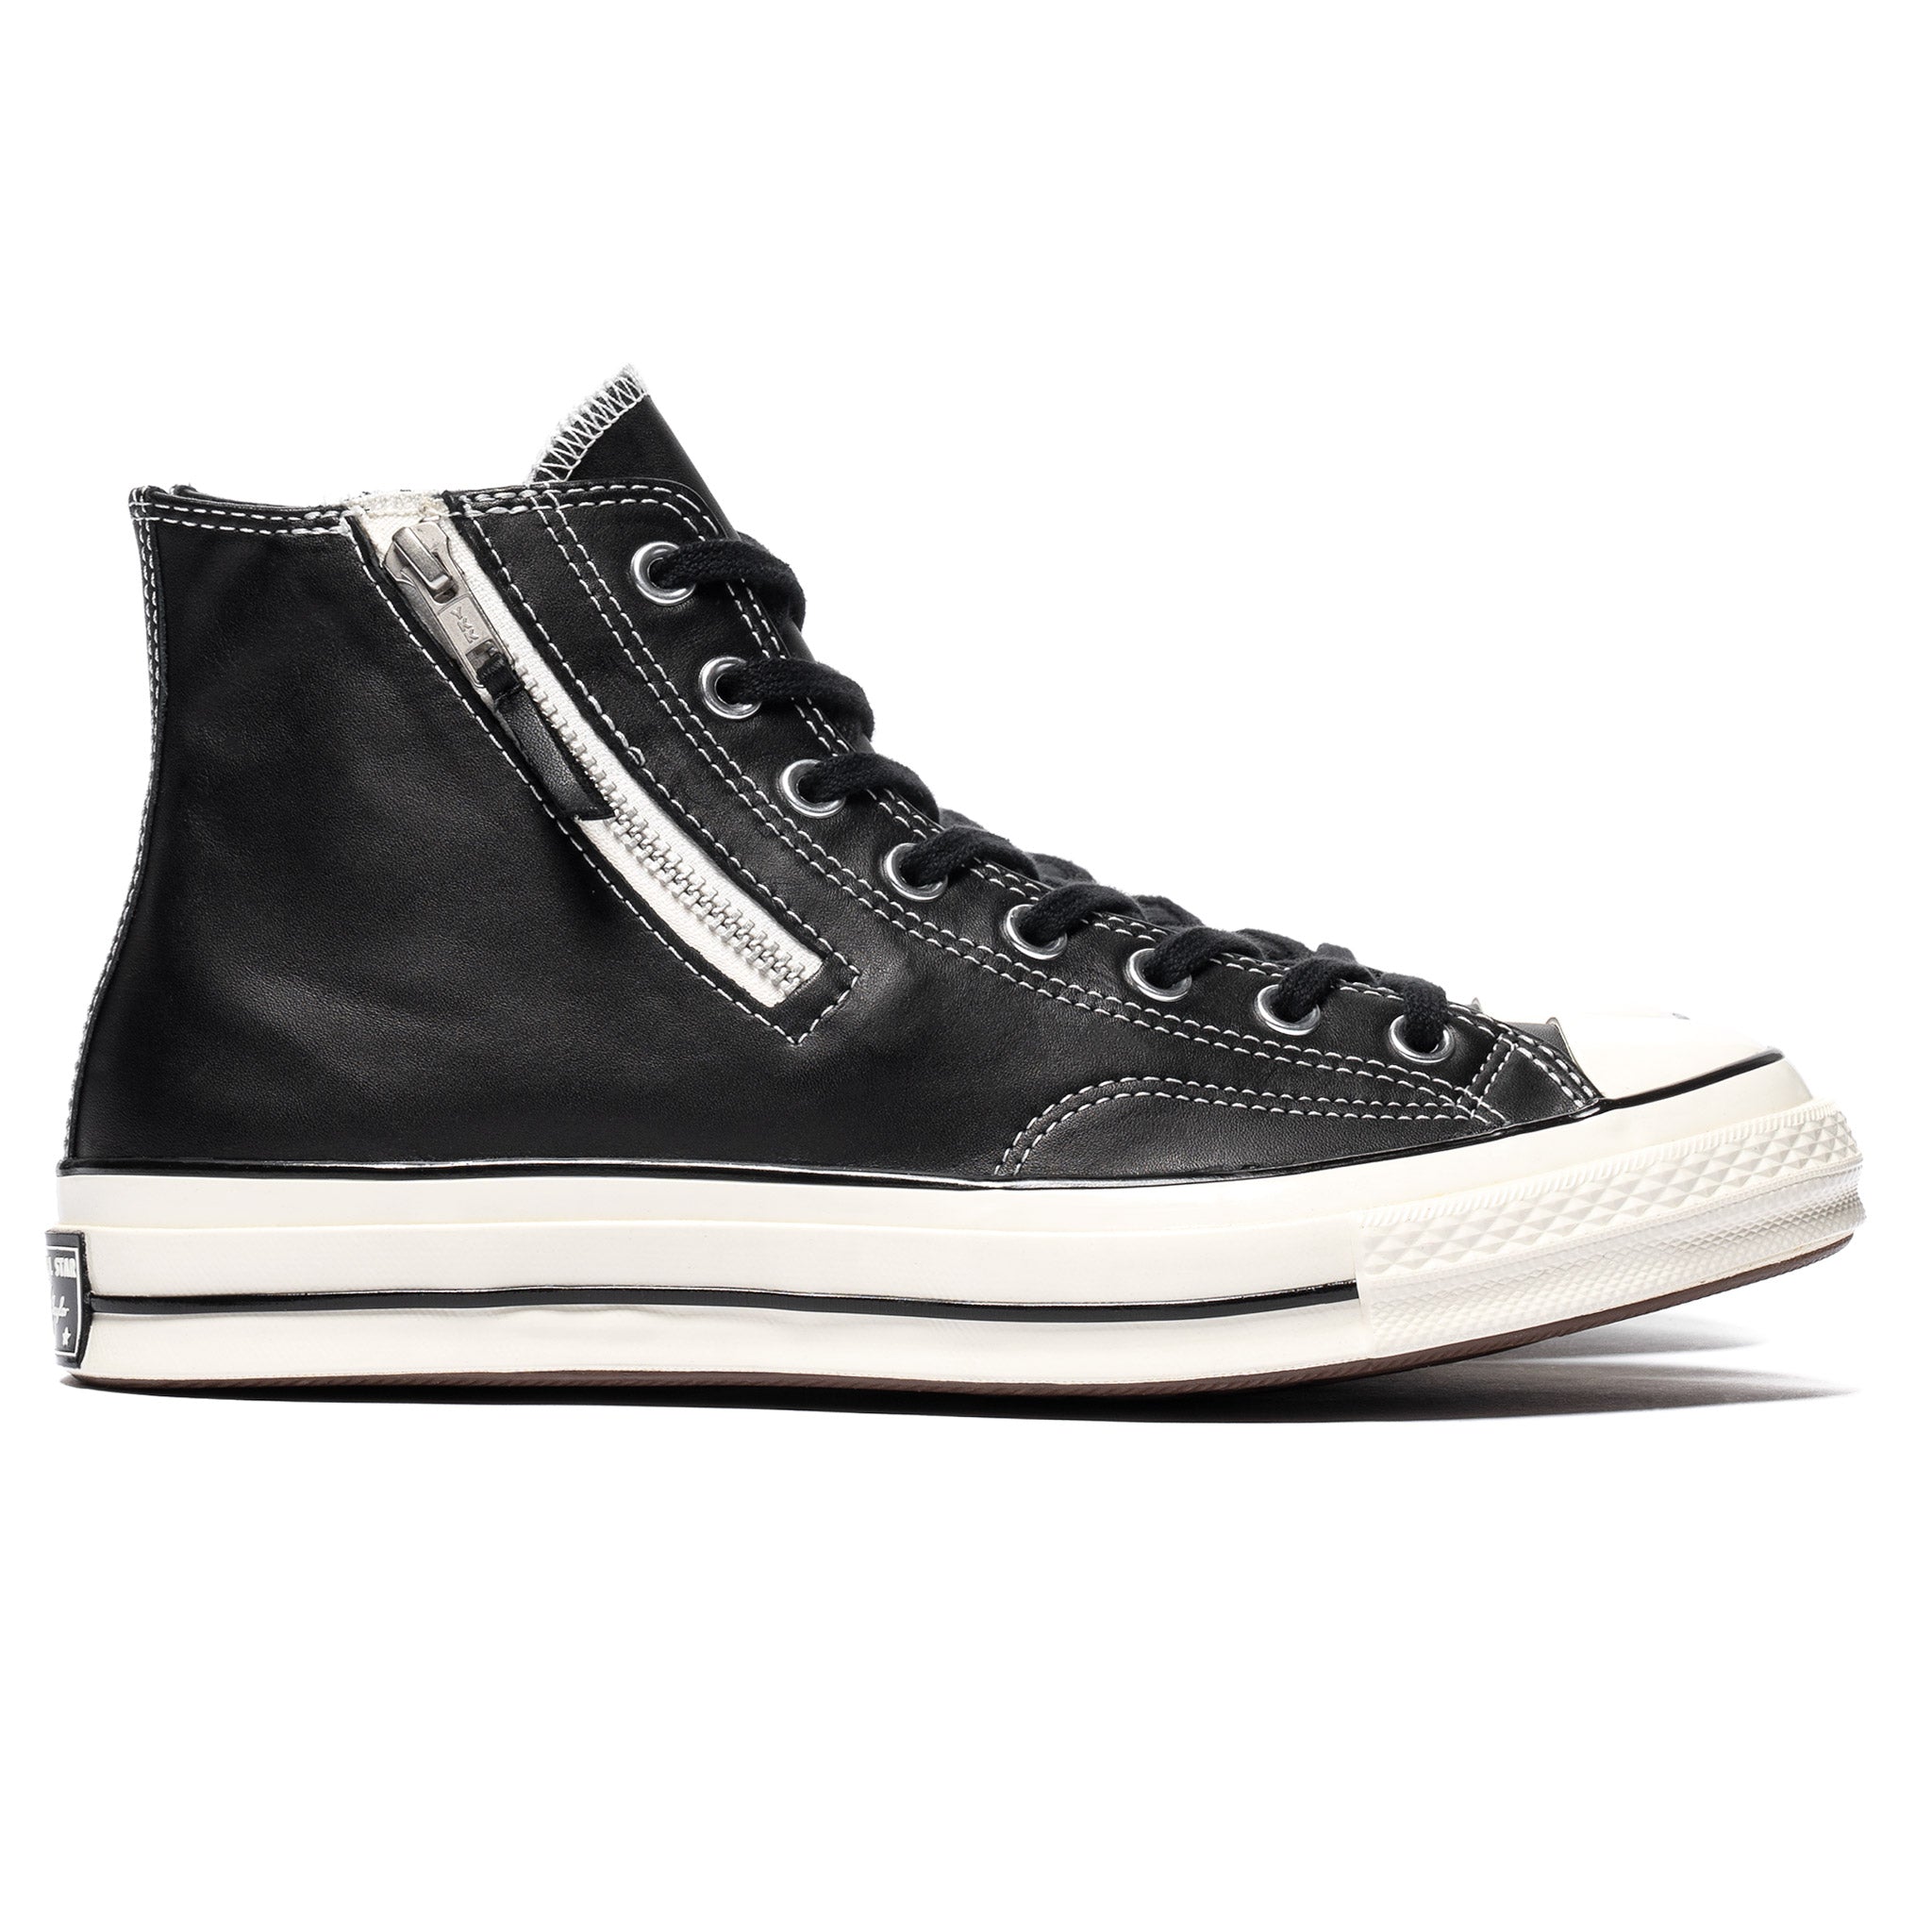 converse chuck taylor all star side zip leather shoes